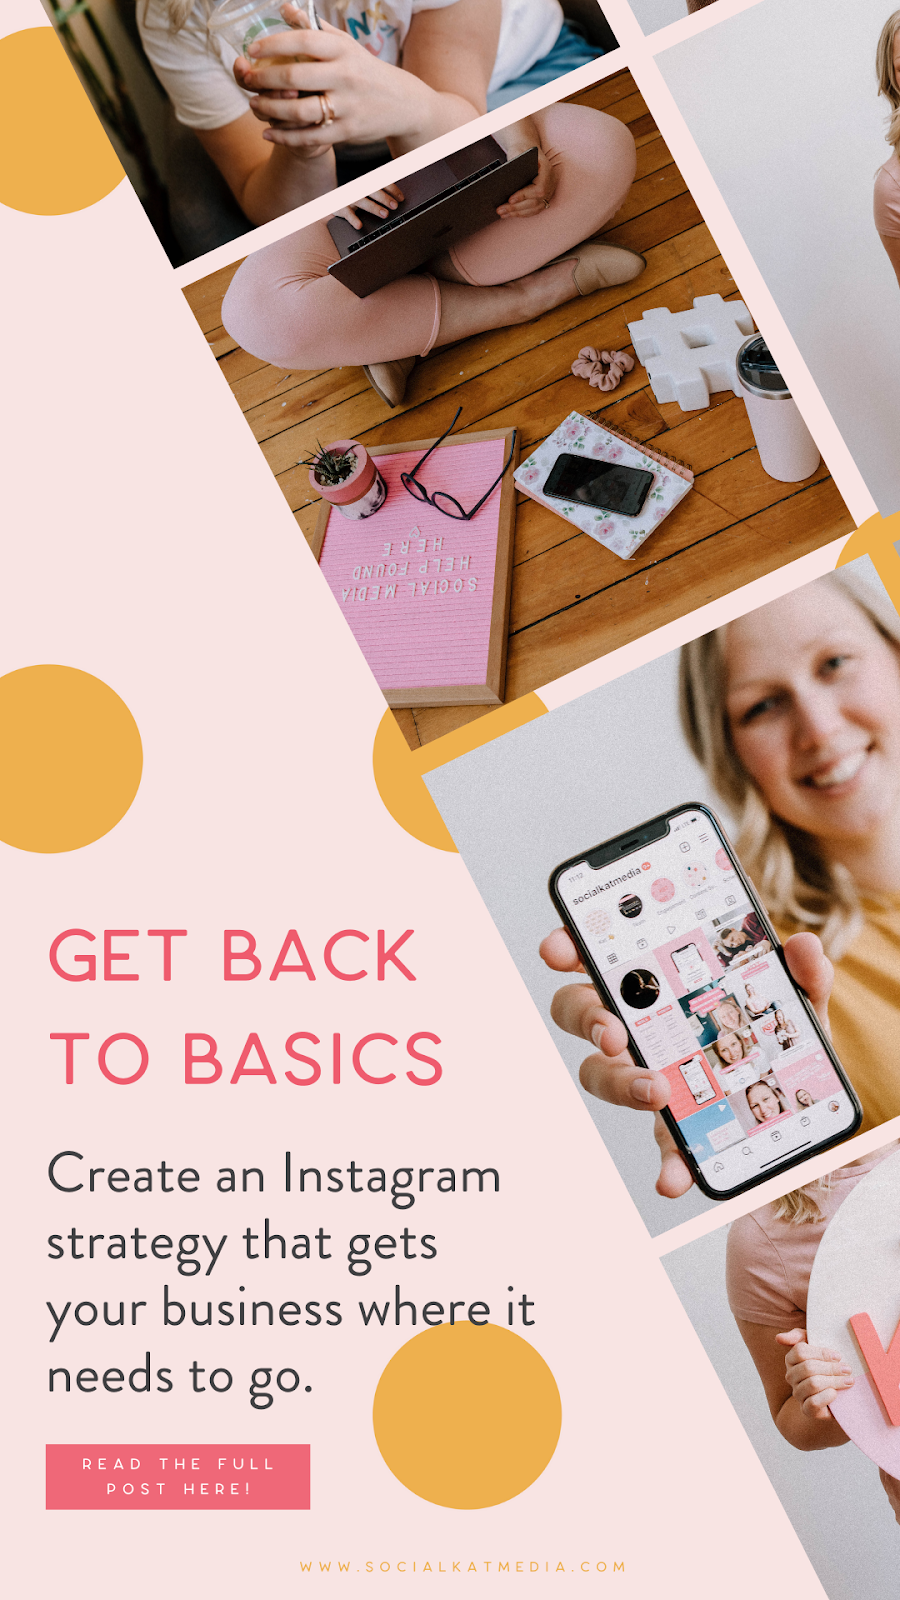 Get back to basics. Create an Instagram strategy that gets your business where it needs to go.